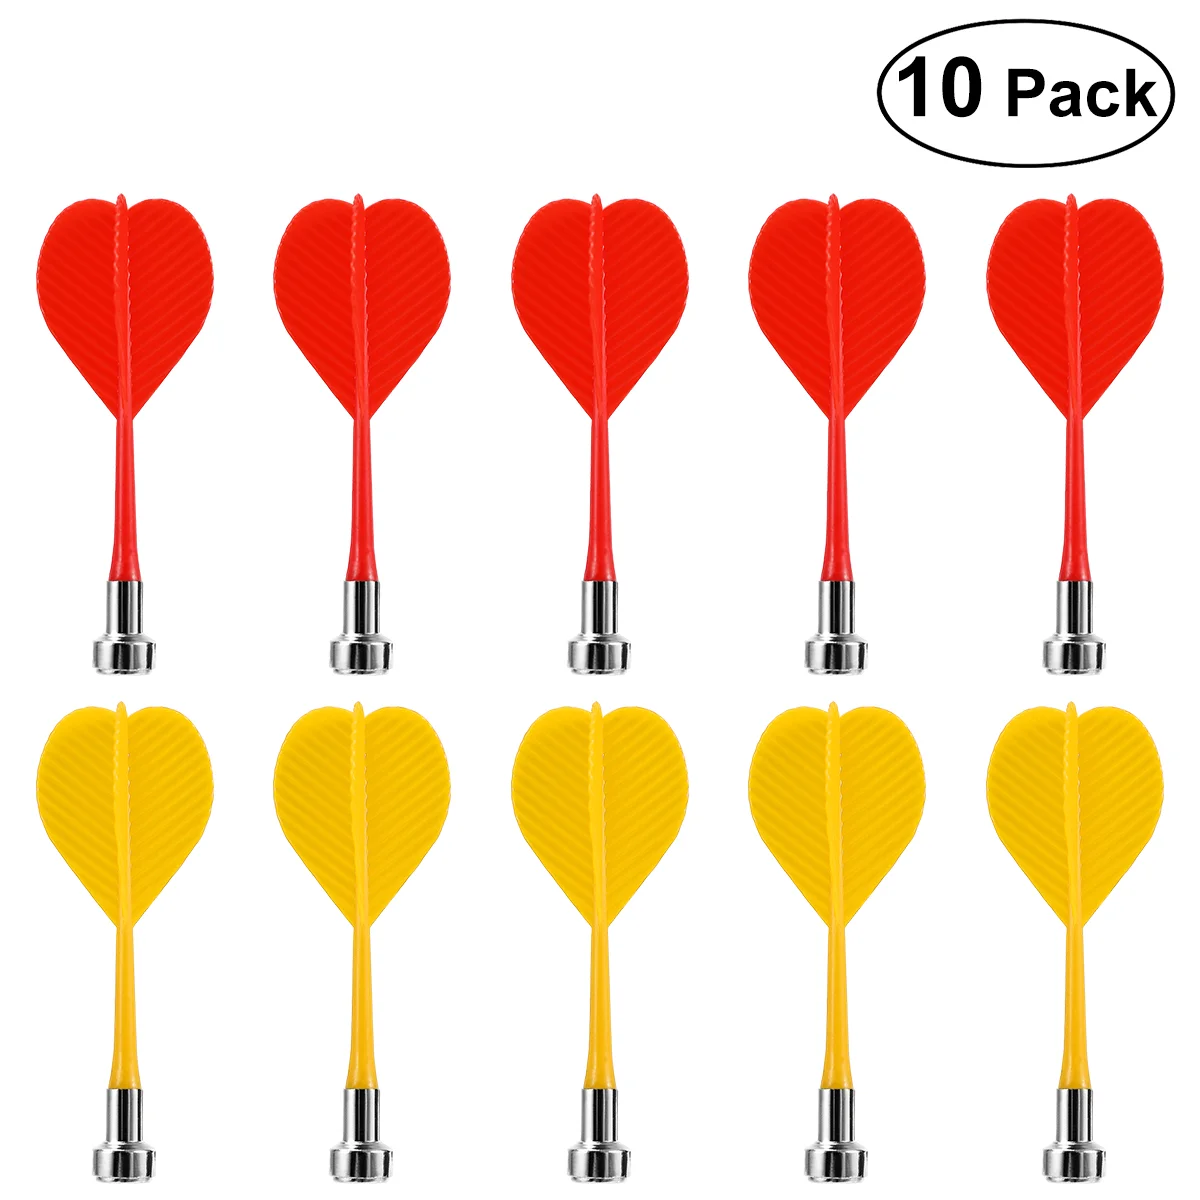 NUOLUX 10pcs Replacement Durable Safe Plastic Wing Magnetic Darts Bullseye Game Toys (Red & Yellow) 10pcs din315 m3 m4 m5 m6 m8 m10 galvanized hand tighten nut butterfly nut ingot wing nuts